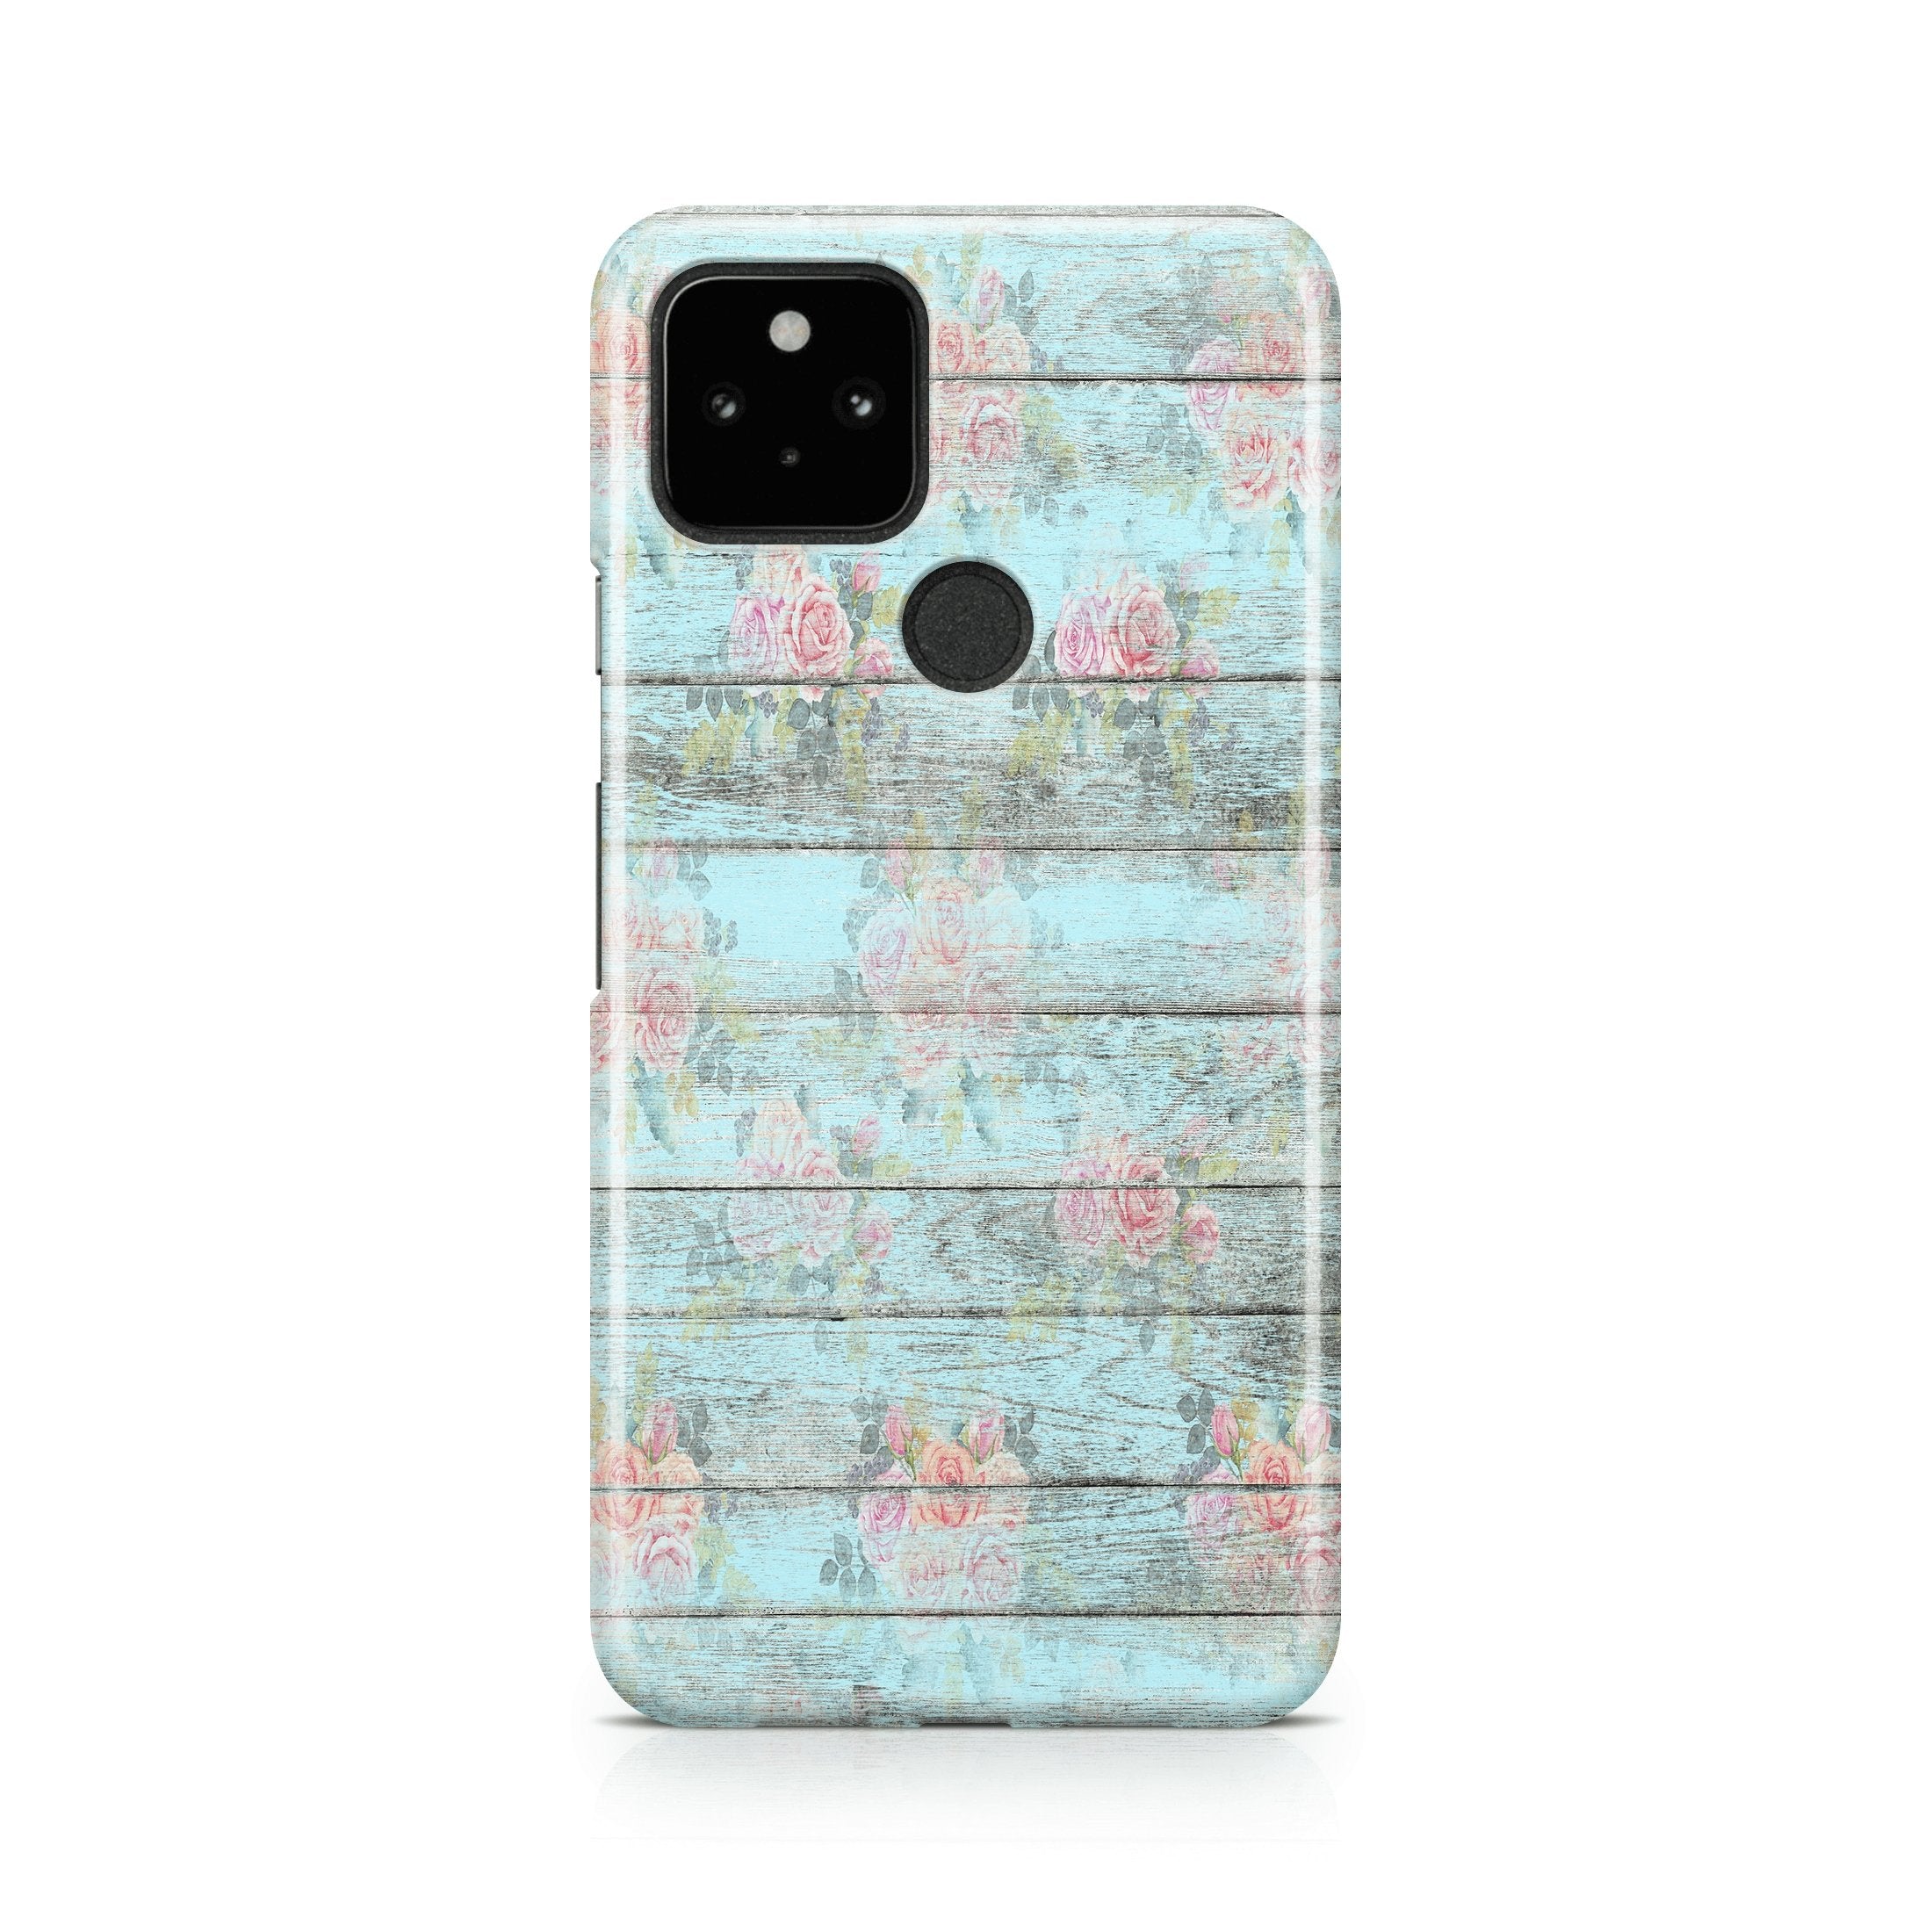 Shabby Chic Wood - Google phone case designs by CaseSwagger